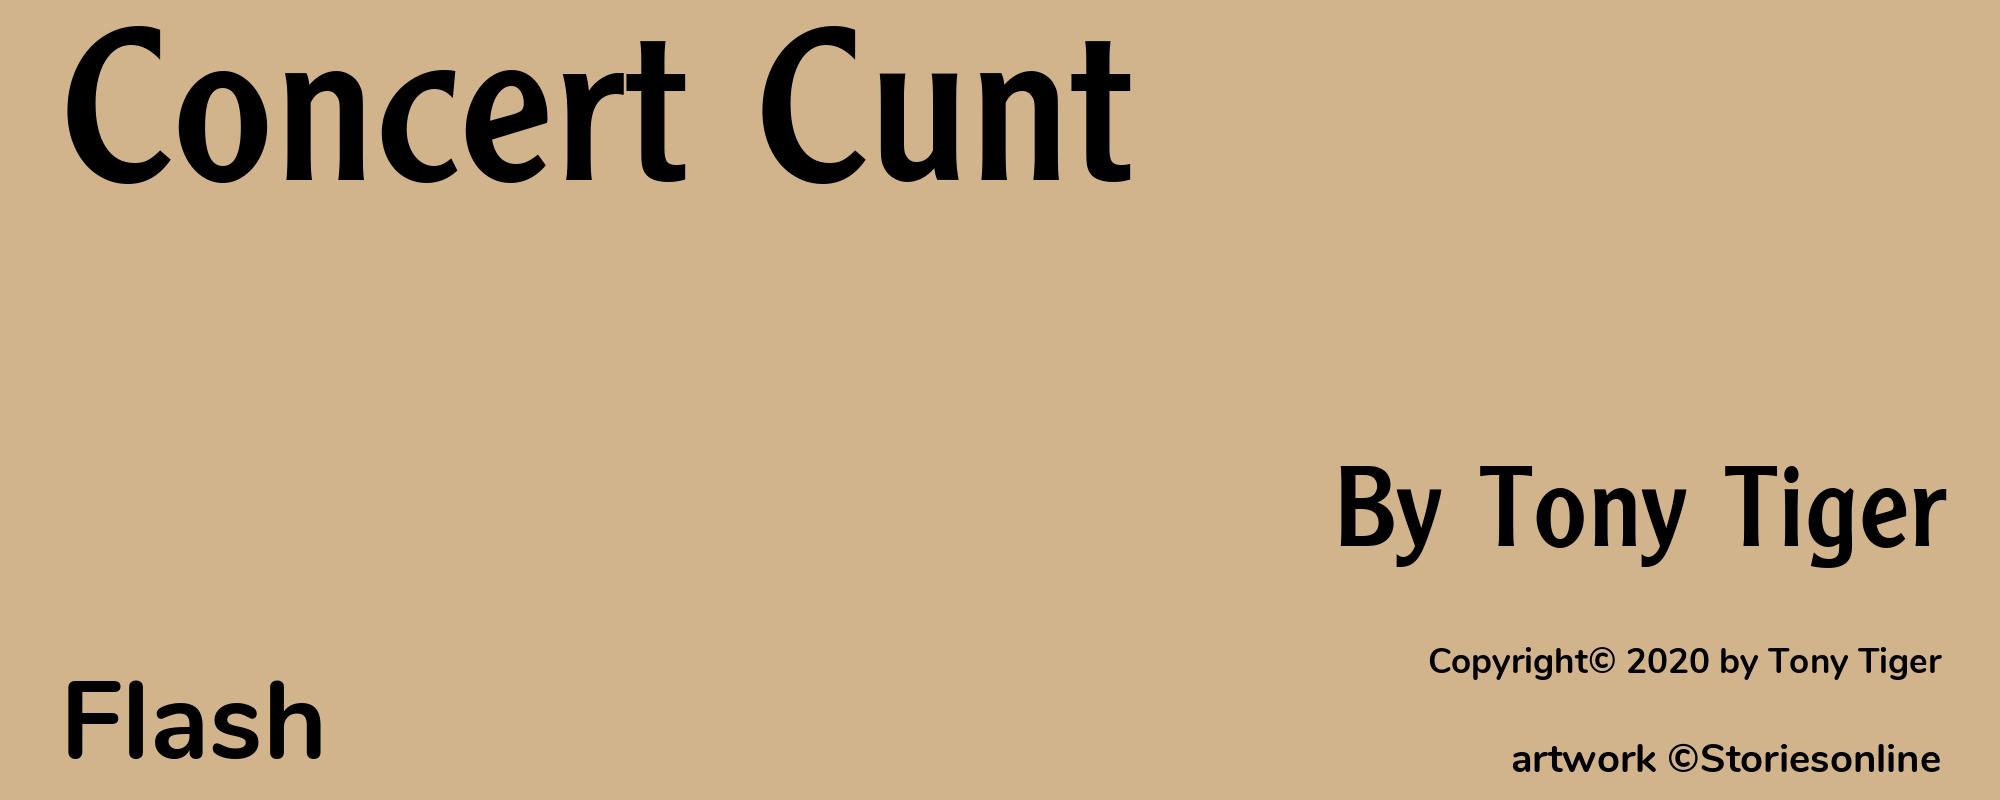 Concert Cunt - Cover